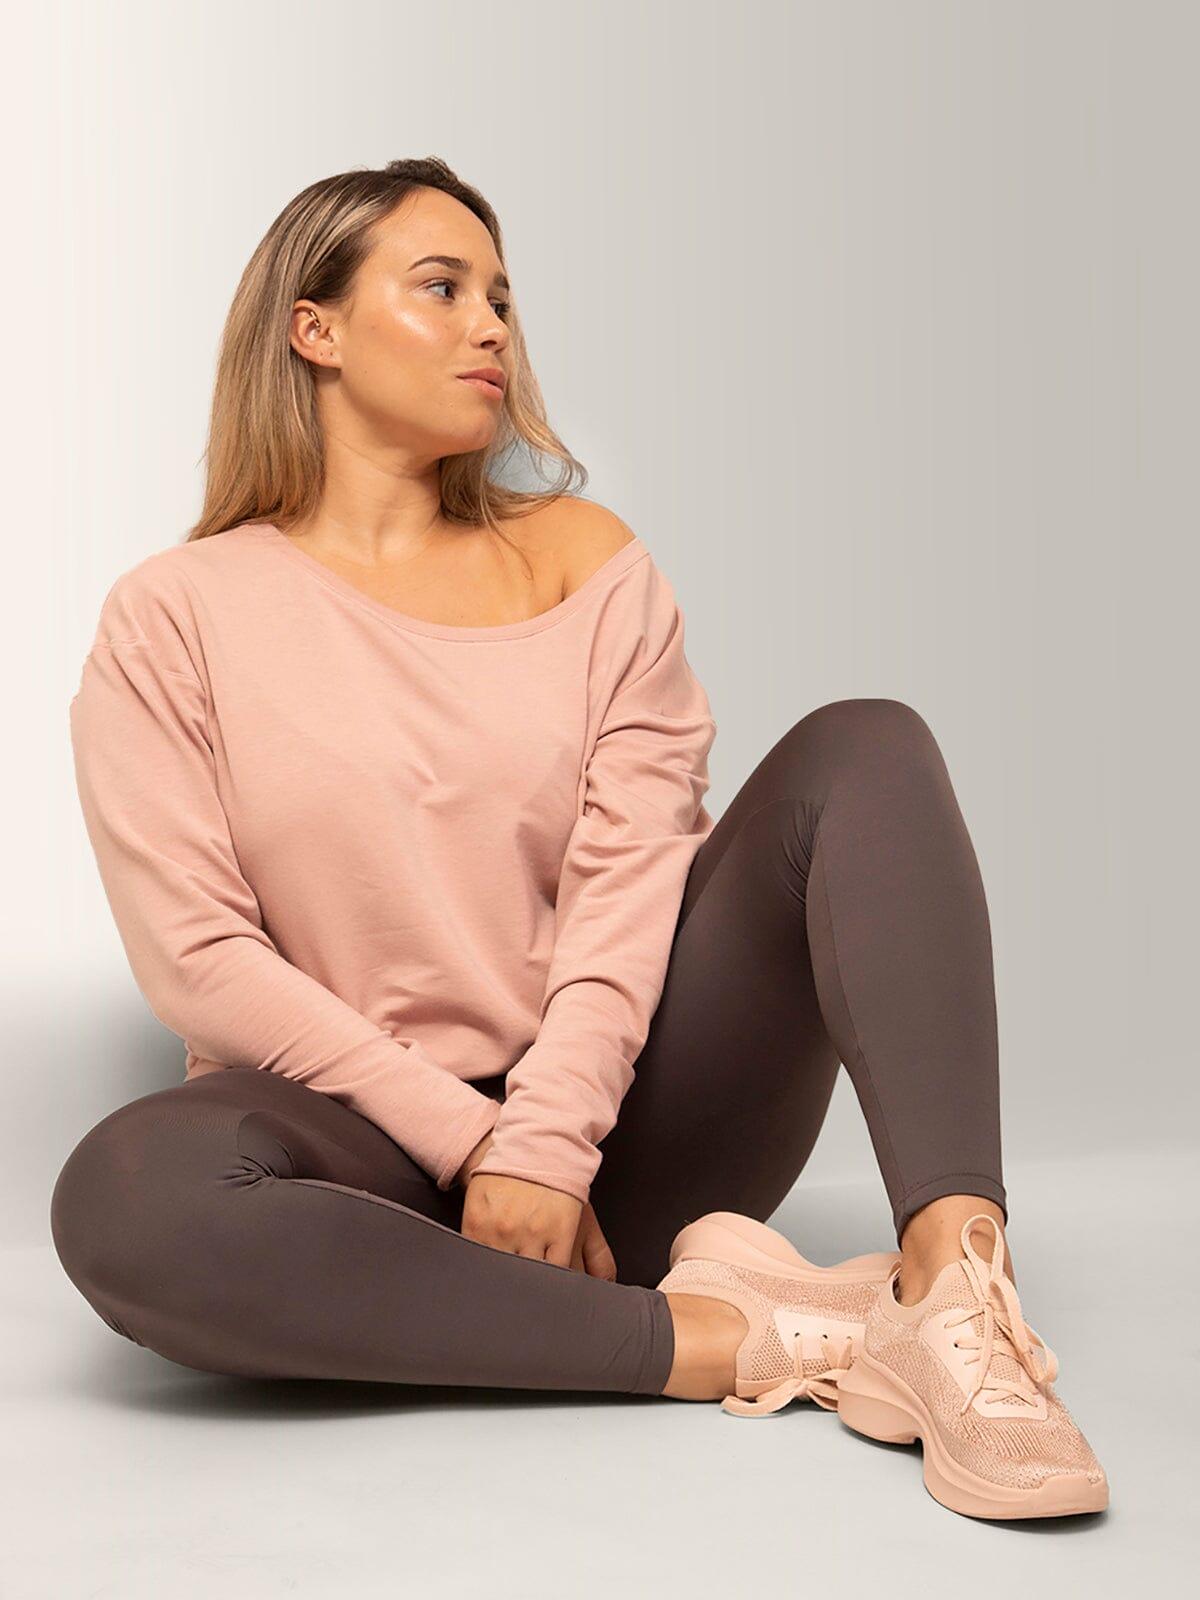 Femme qui porte le chandail Flashdance de Rose Boreal./ Women wearing the Flashdance pullover from Rose Boreal. - Cassis